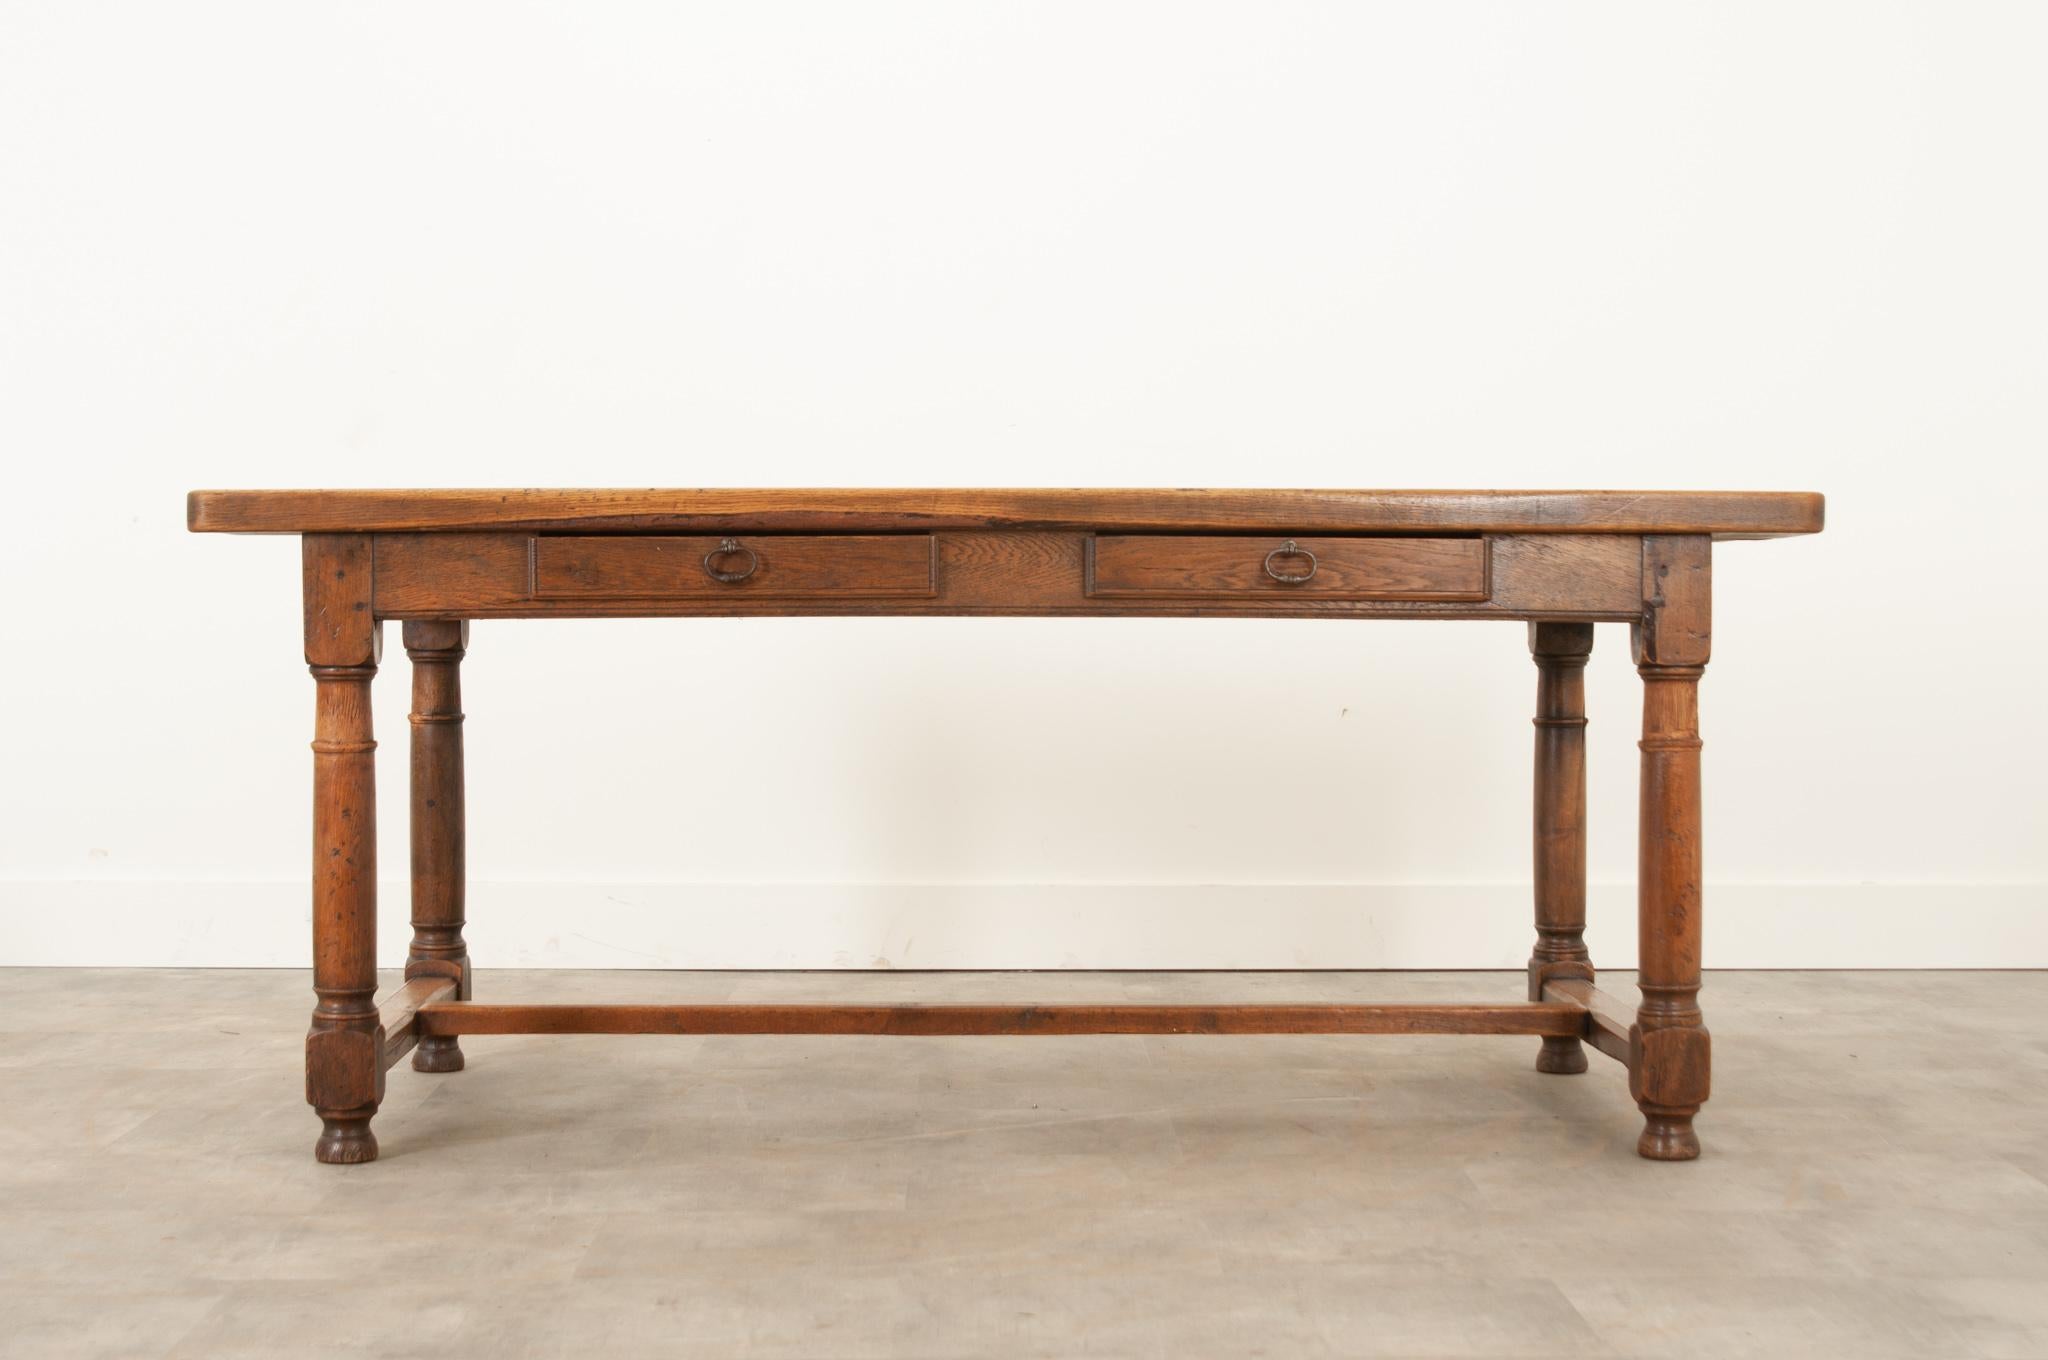 This rustic farm table was handcrafted in 19th century France from solid oak and built to stand the test of time. The thick top showcases the trademark knots in the woodgrain and a fantastic patina. The around houses two narrow drawers fixed with